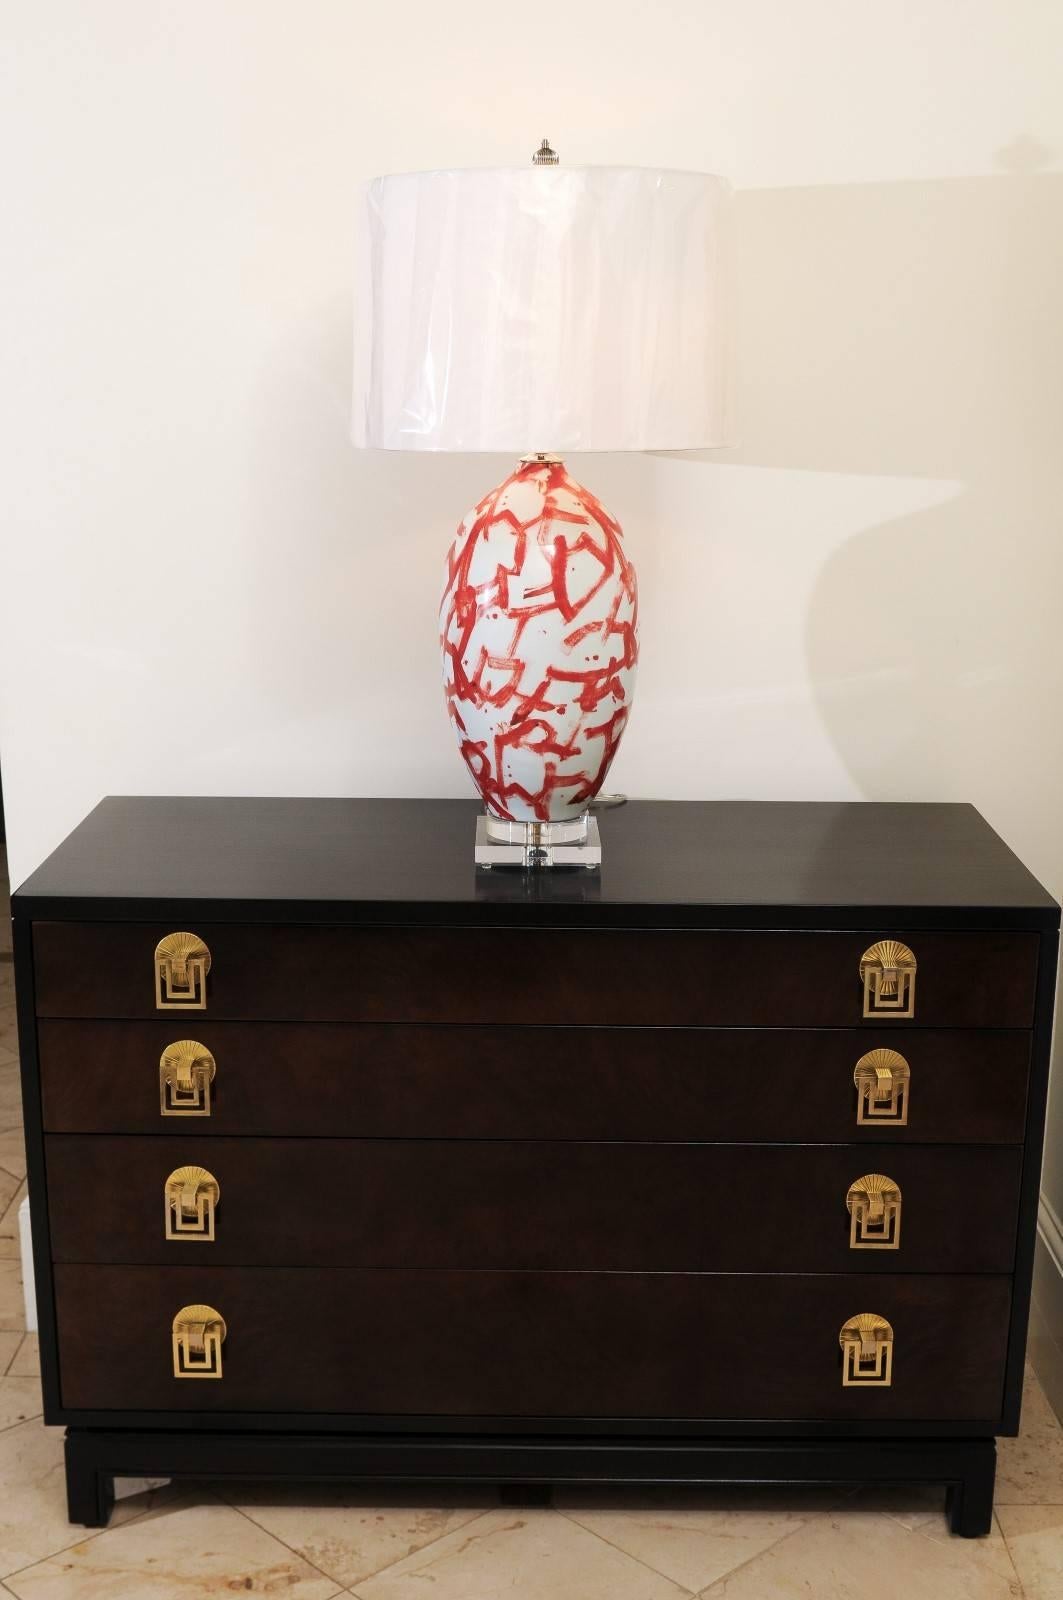 A stunning pair of large-scale vessels, circa 1990, as newly built custom lamps. Beautiful form with graphic markings. Fabulous weight and color. Built using components of only the finest quality. Special pieces designed to accent an important